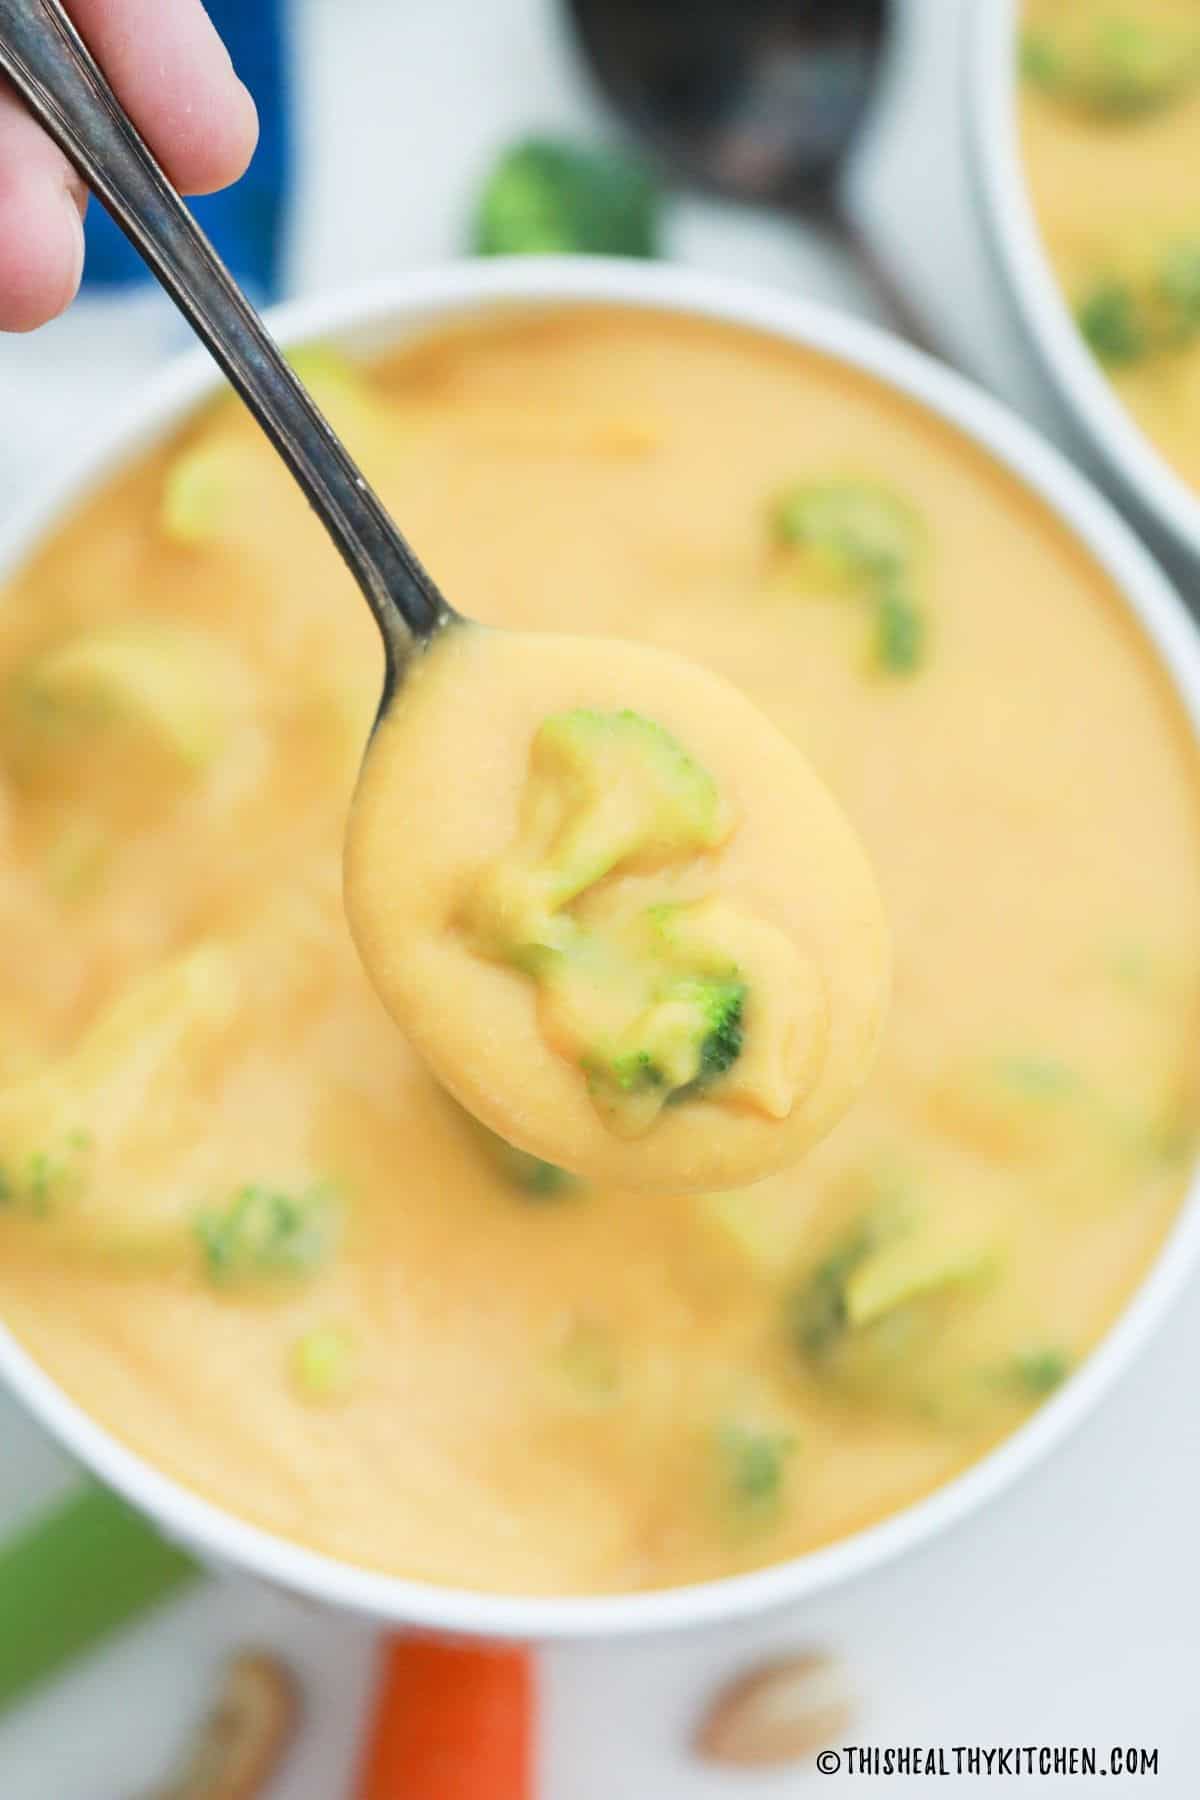 Spoonful of broccoli cheddar soup being held above bowl.